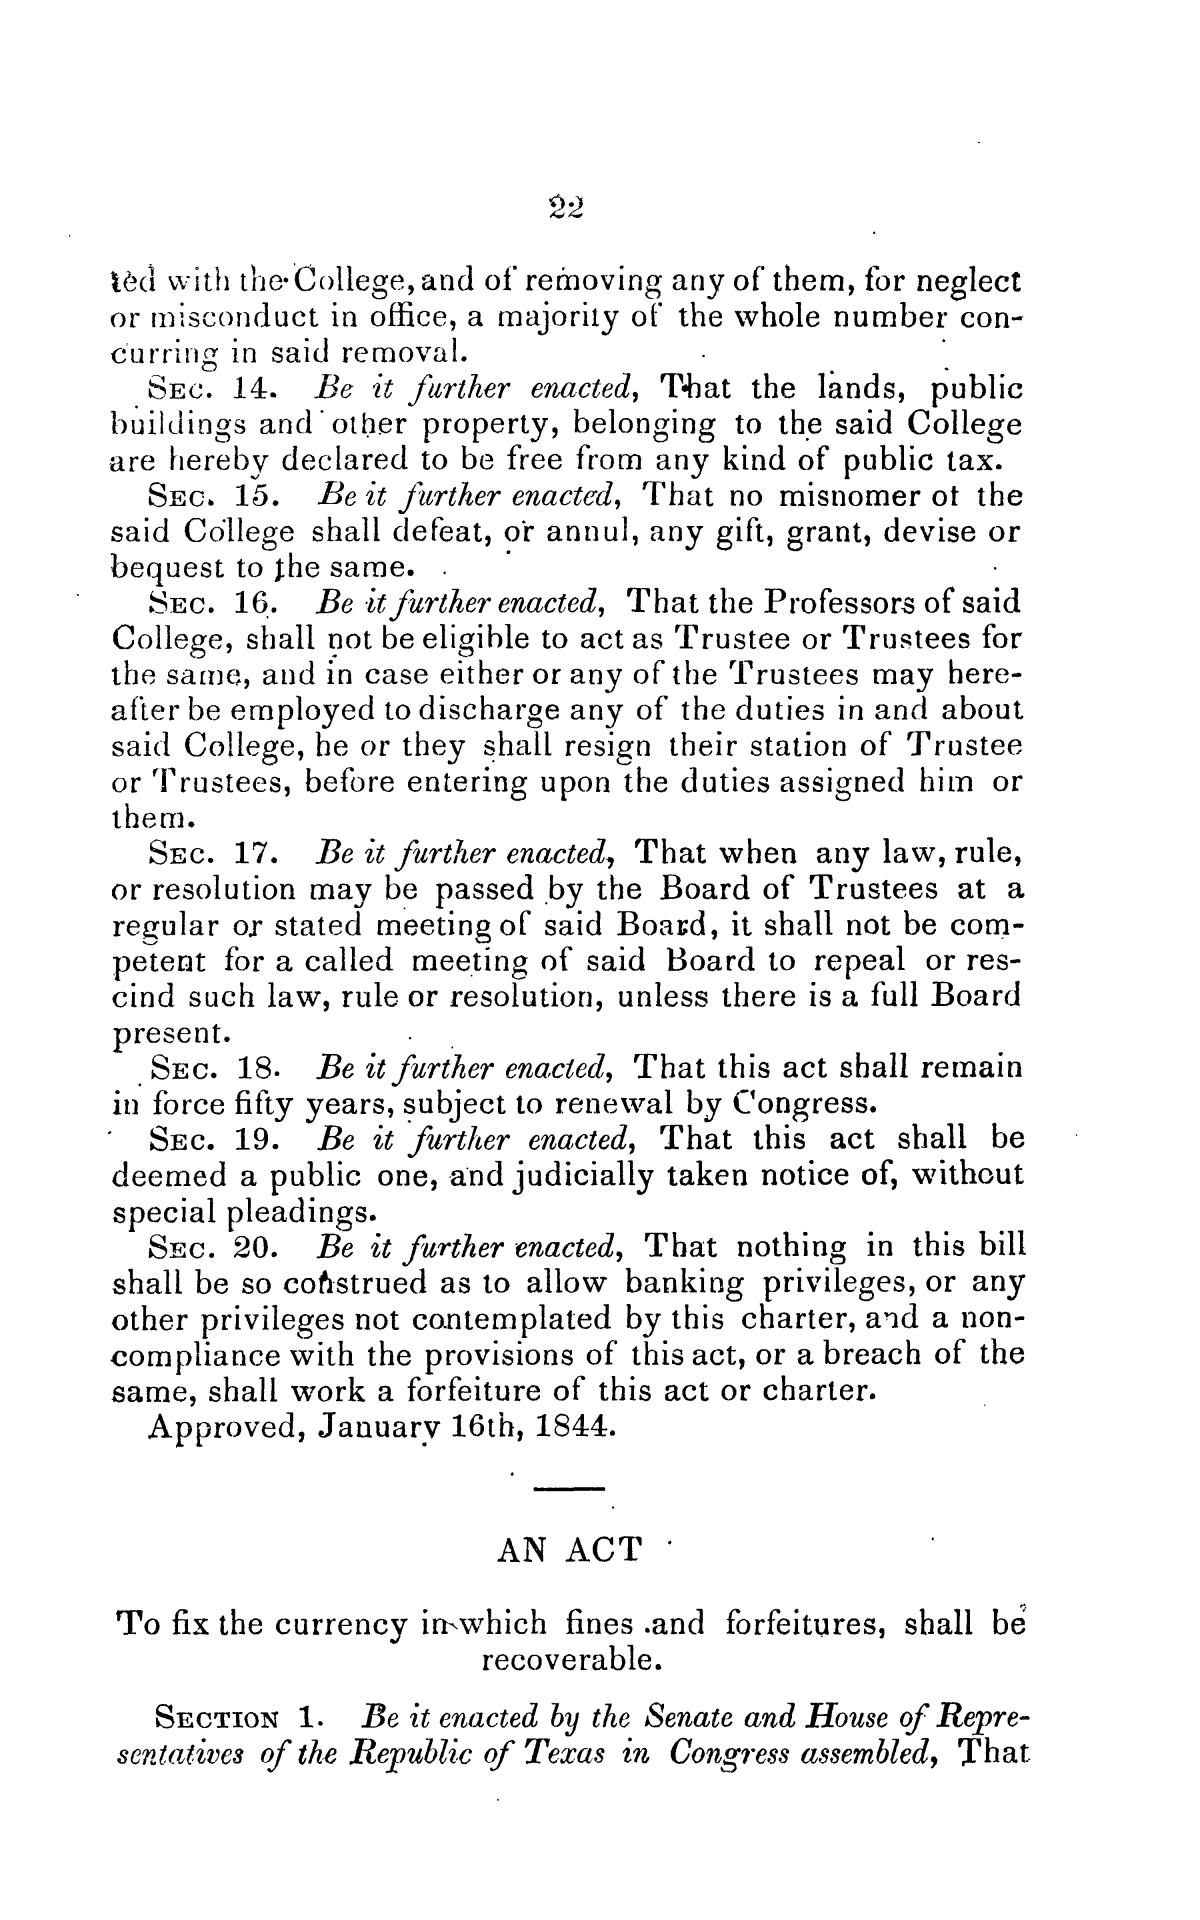 Laws Passed by the Eighth Congress of the Republic of Texas.
                                                
                                                    22
                                                